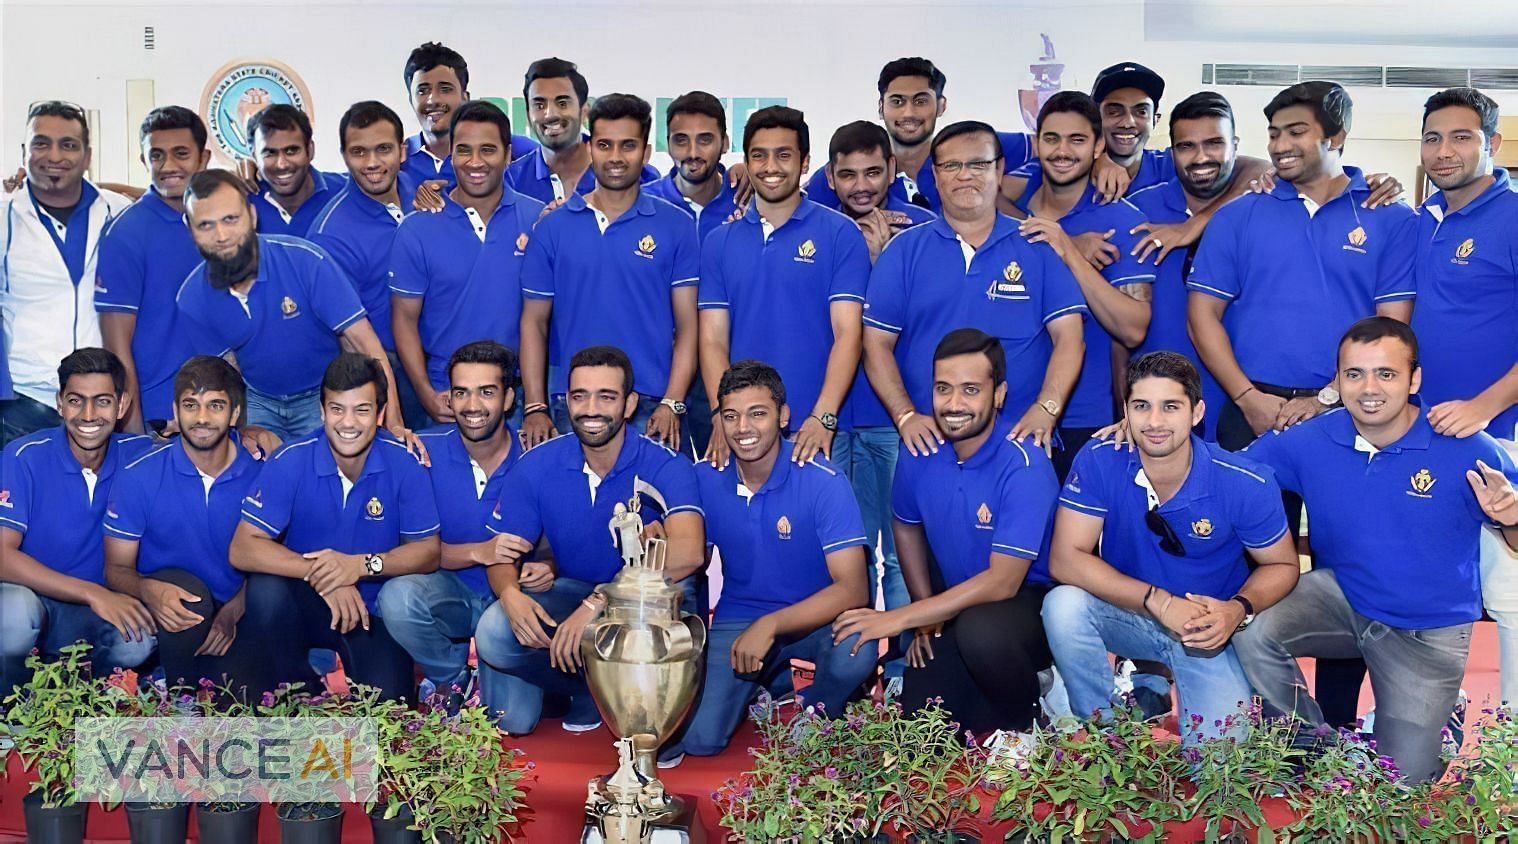 The victorious Karnataka team are all smiles with the Ranji Trophy!